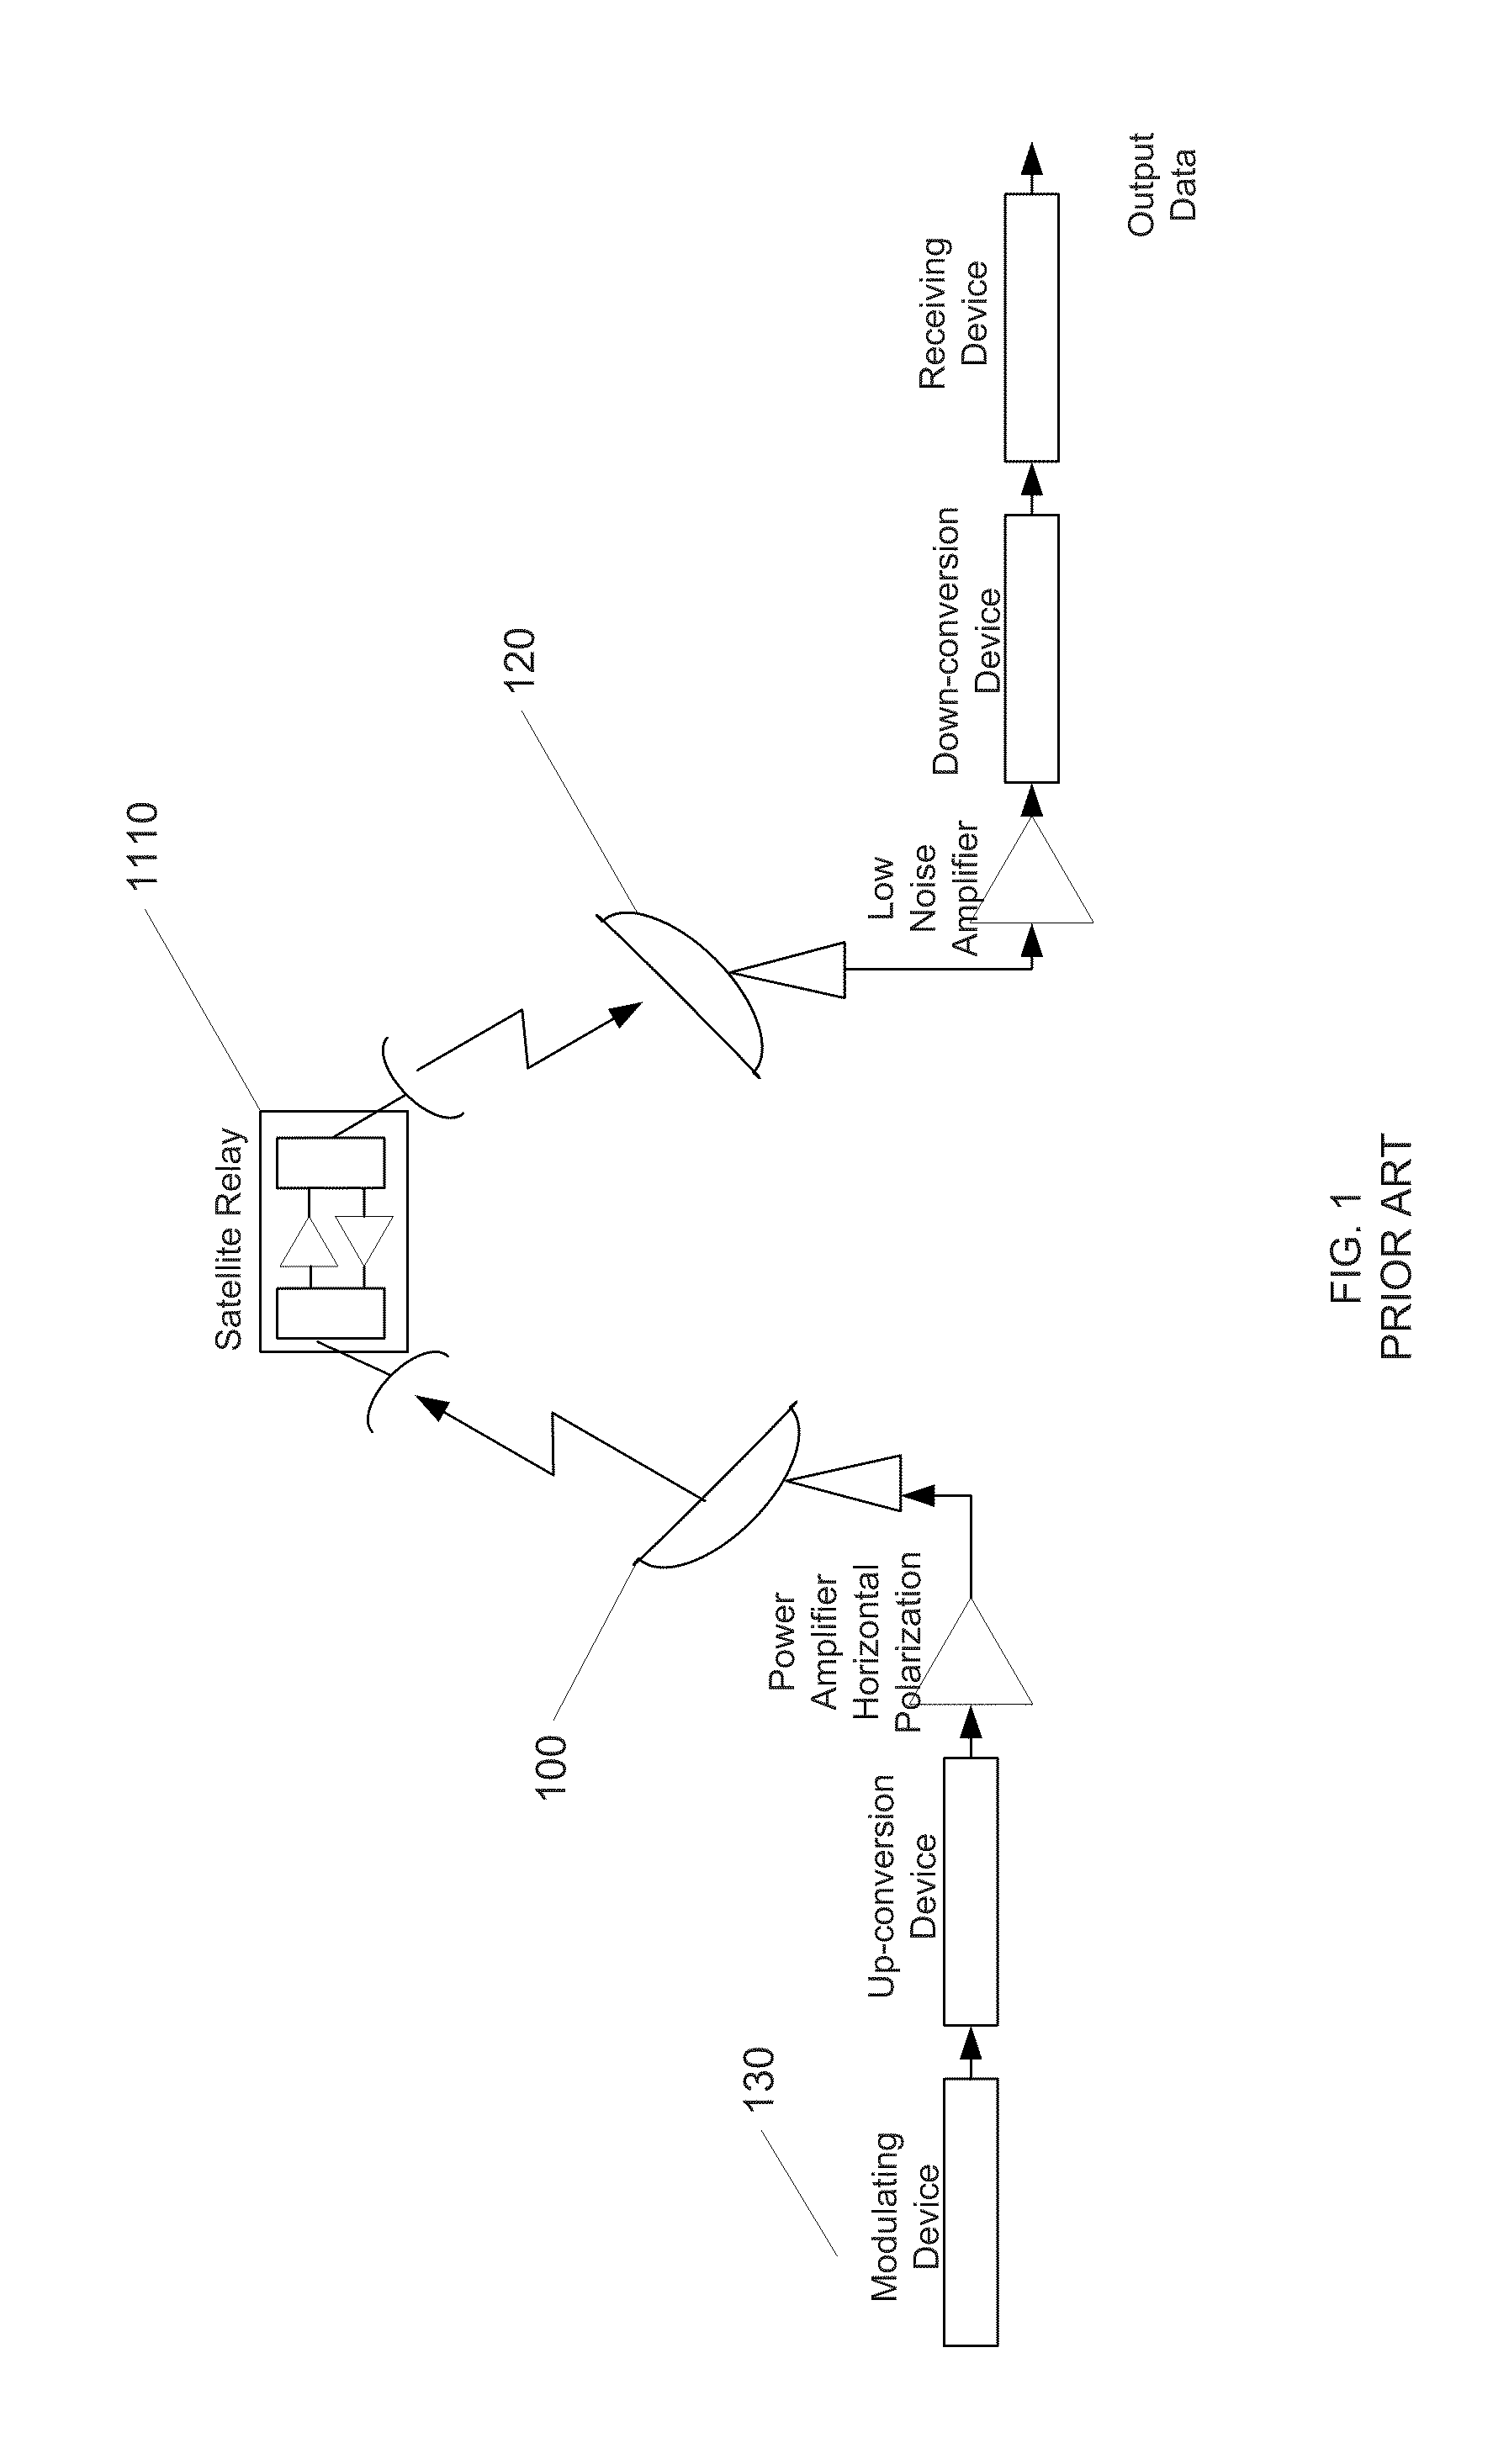 Method and System for Closed Loop Pre-Distortion for PSK/QAM Modulation Using Feedback from Distant End of a Link